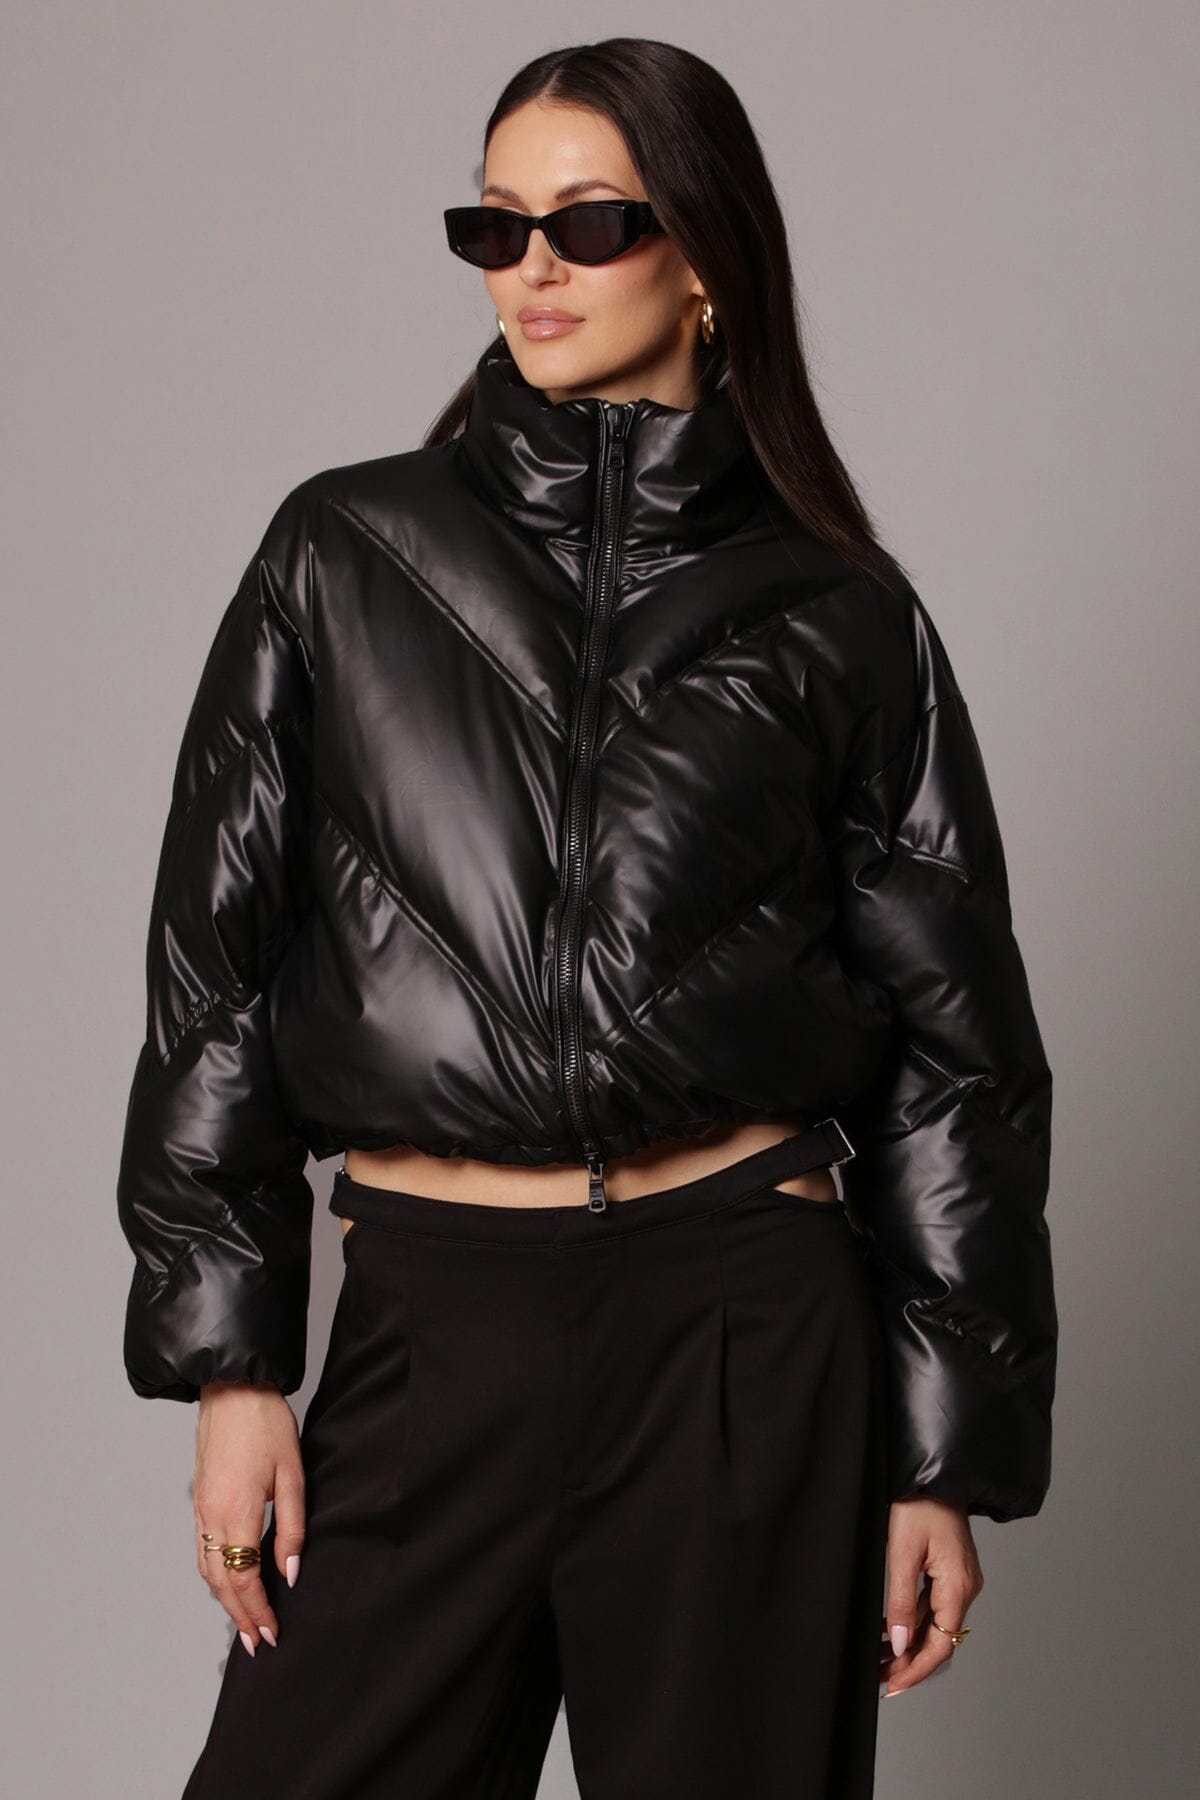 Black thermal puff glossy cropped puffer jacket coat - figure flattering casual to dressy puffers jackets outerwear for ladies